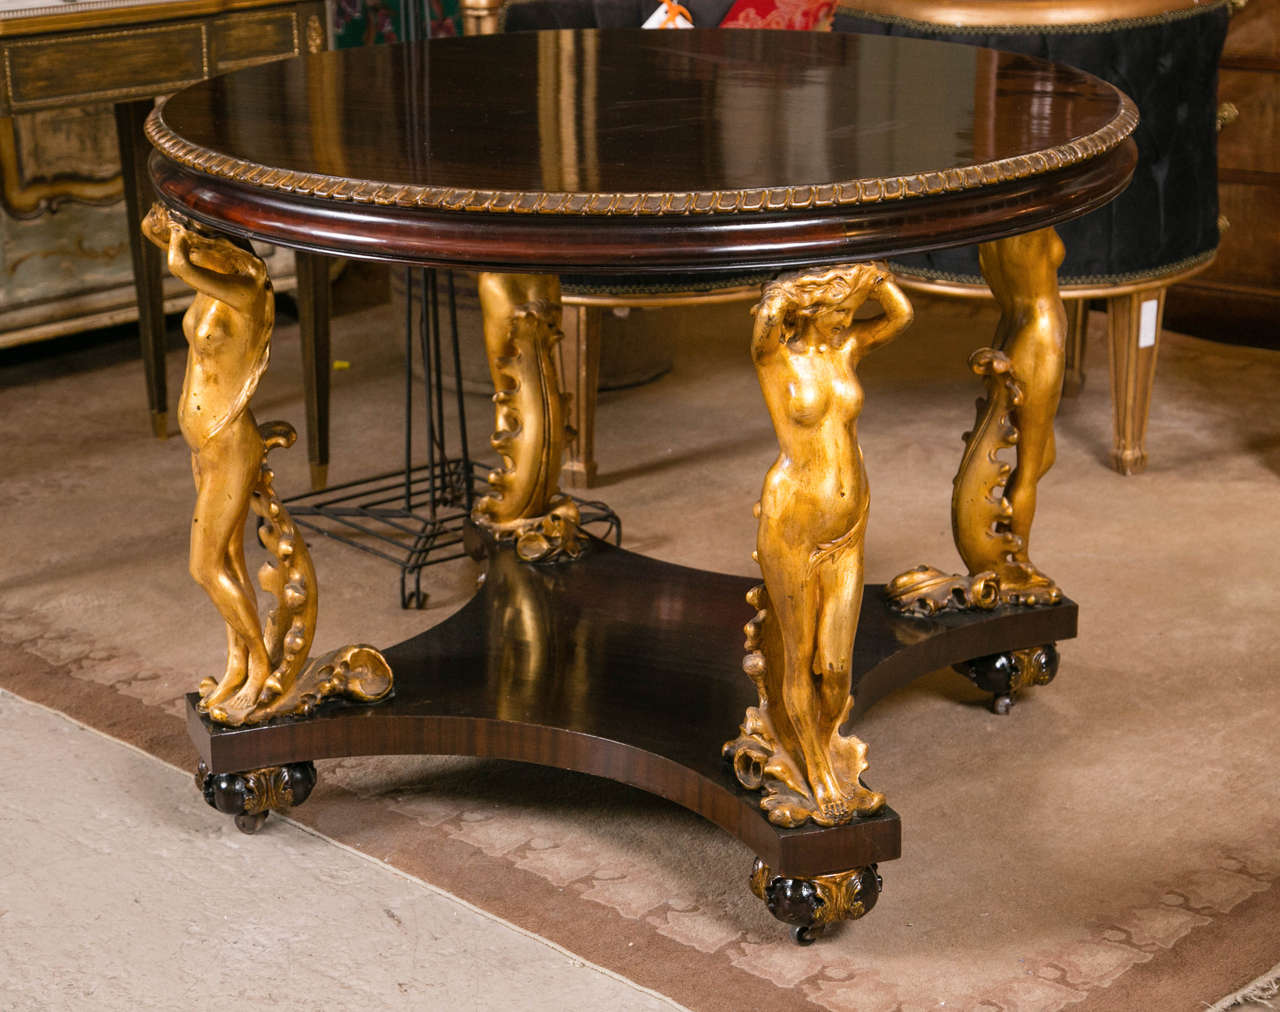 A Antique Carved Figural Center Table. This antique center table is a one of a kind piece having finely carved feet with rollers under a gilt leaf carved bun supporting a center lower shelf having four finely chiseled naked maidens holding up a